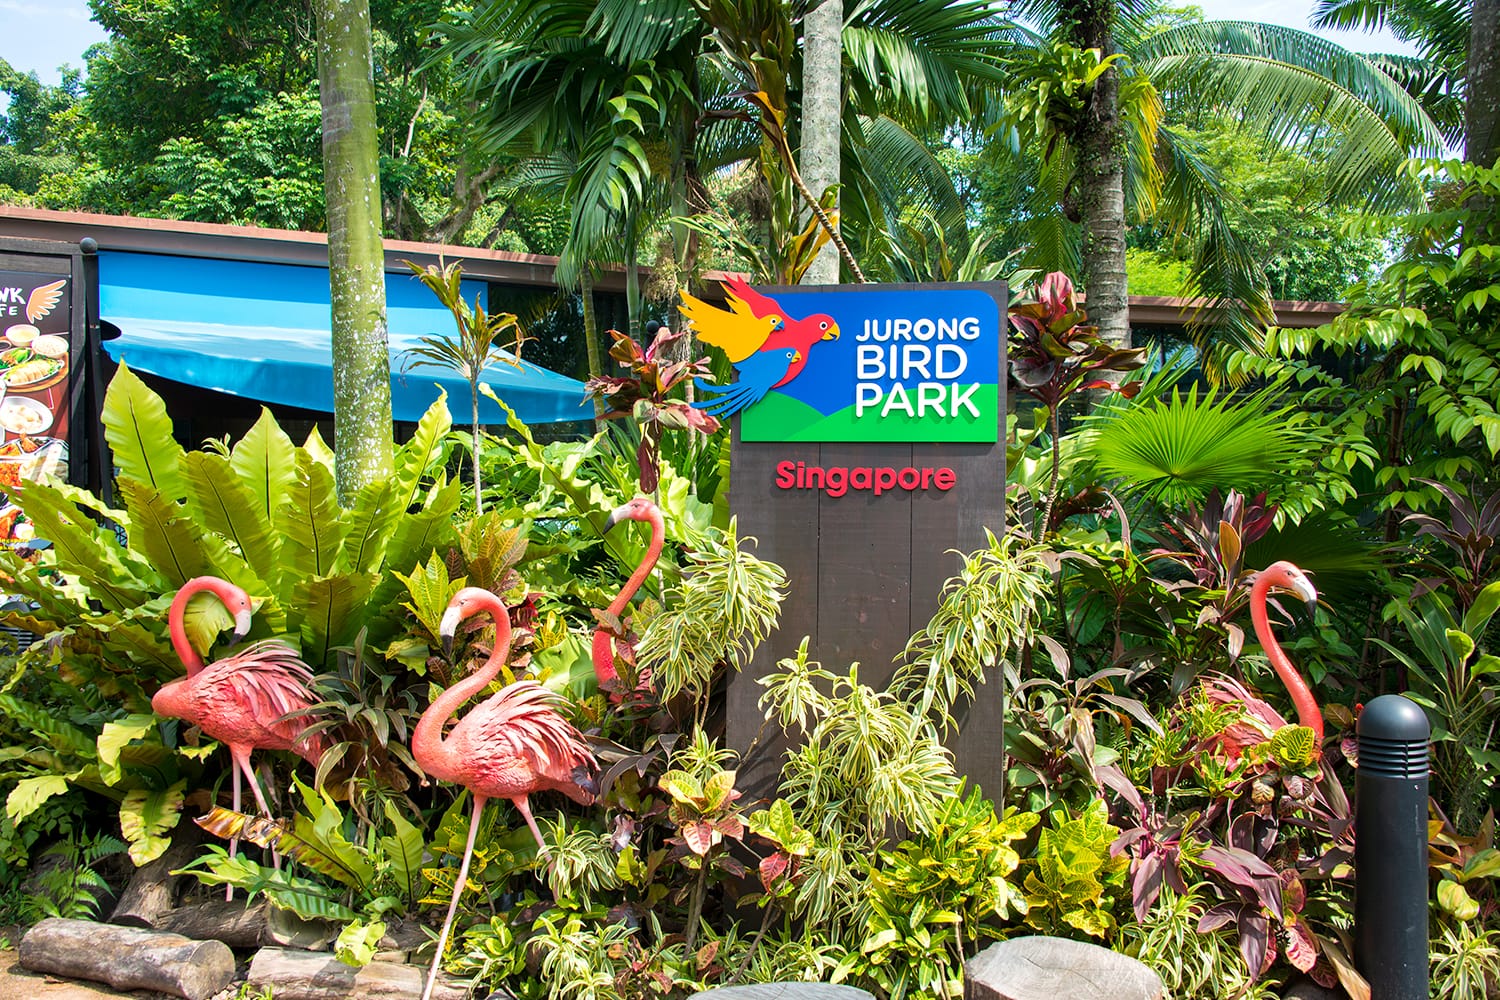 Entrance to Jurong Bird Park in Singapore